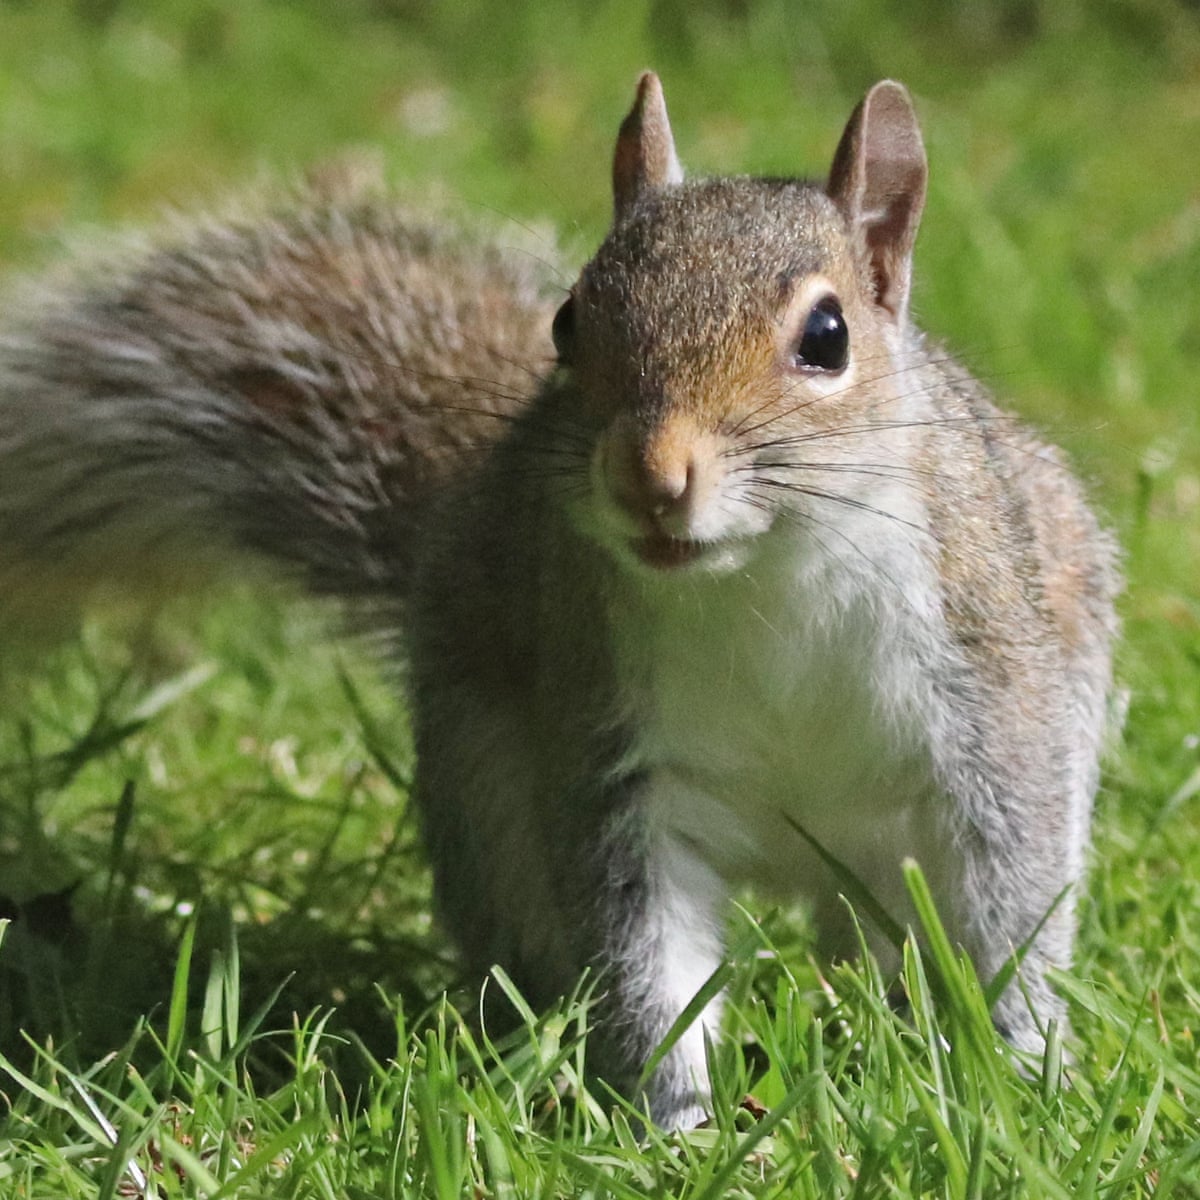 Tim Dowling: the squirrel has contravened social distancing guidelines | Life and style | The Guardian